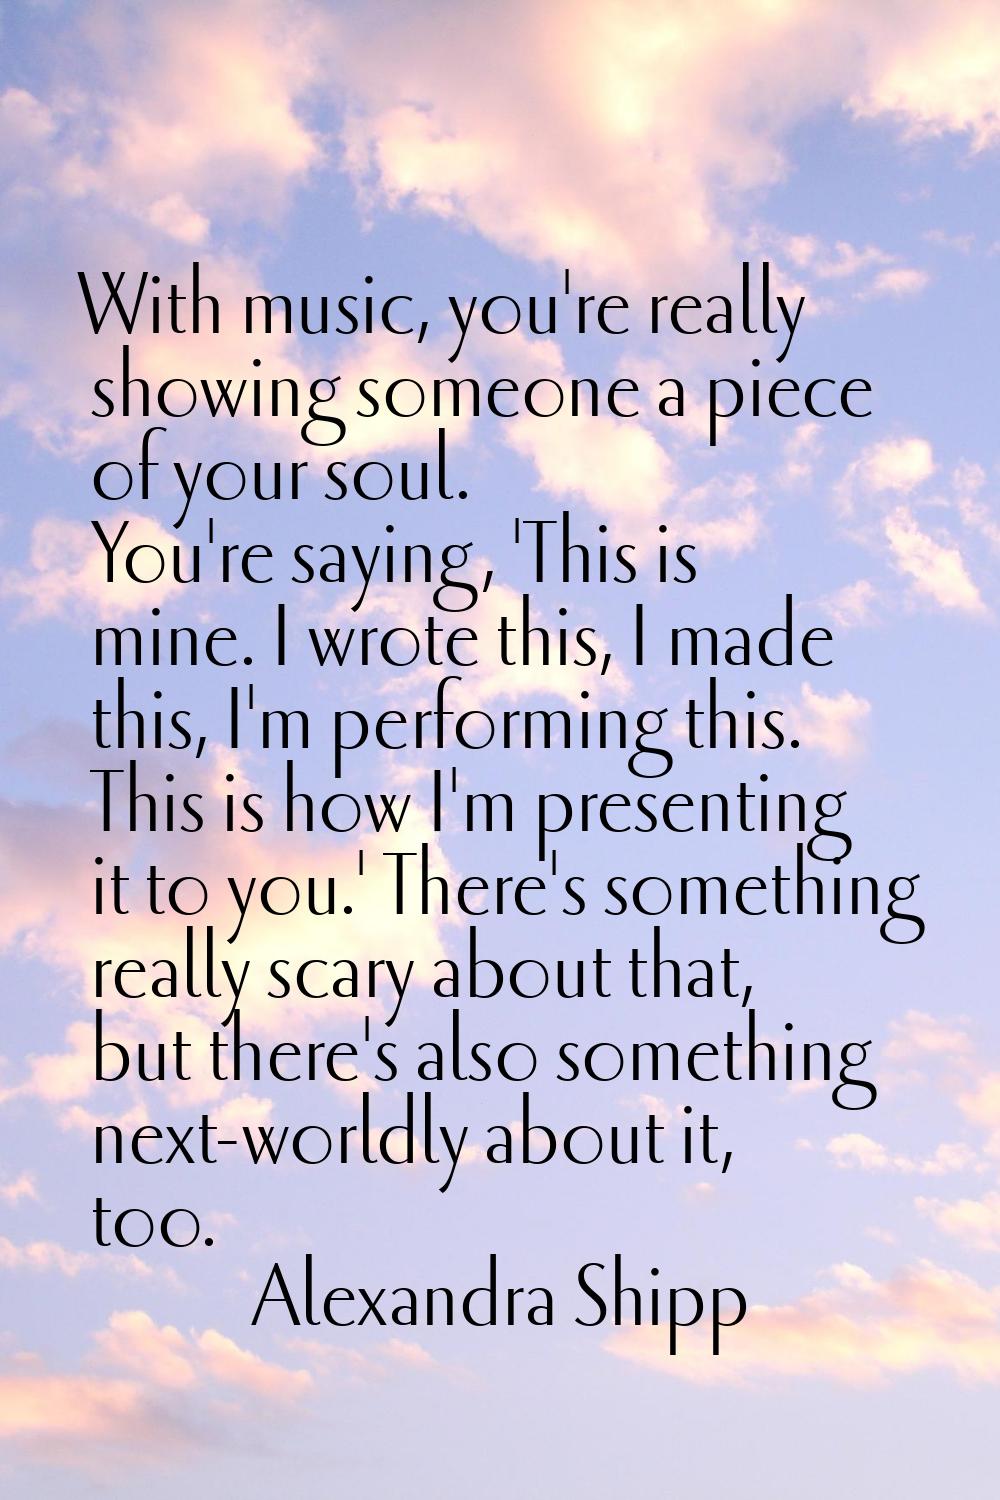 With music, you're really showing someone a piece of your soul. You're saying, 'This is mine. I wro